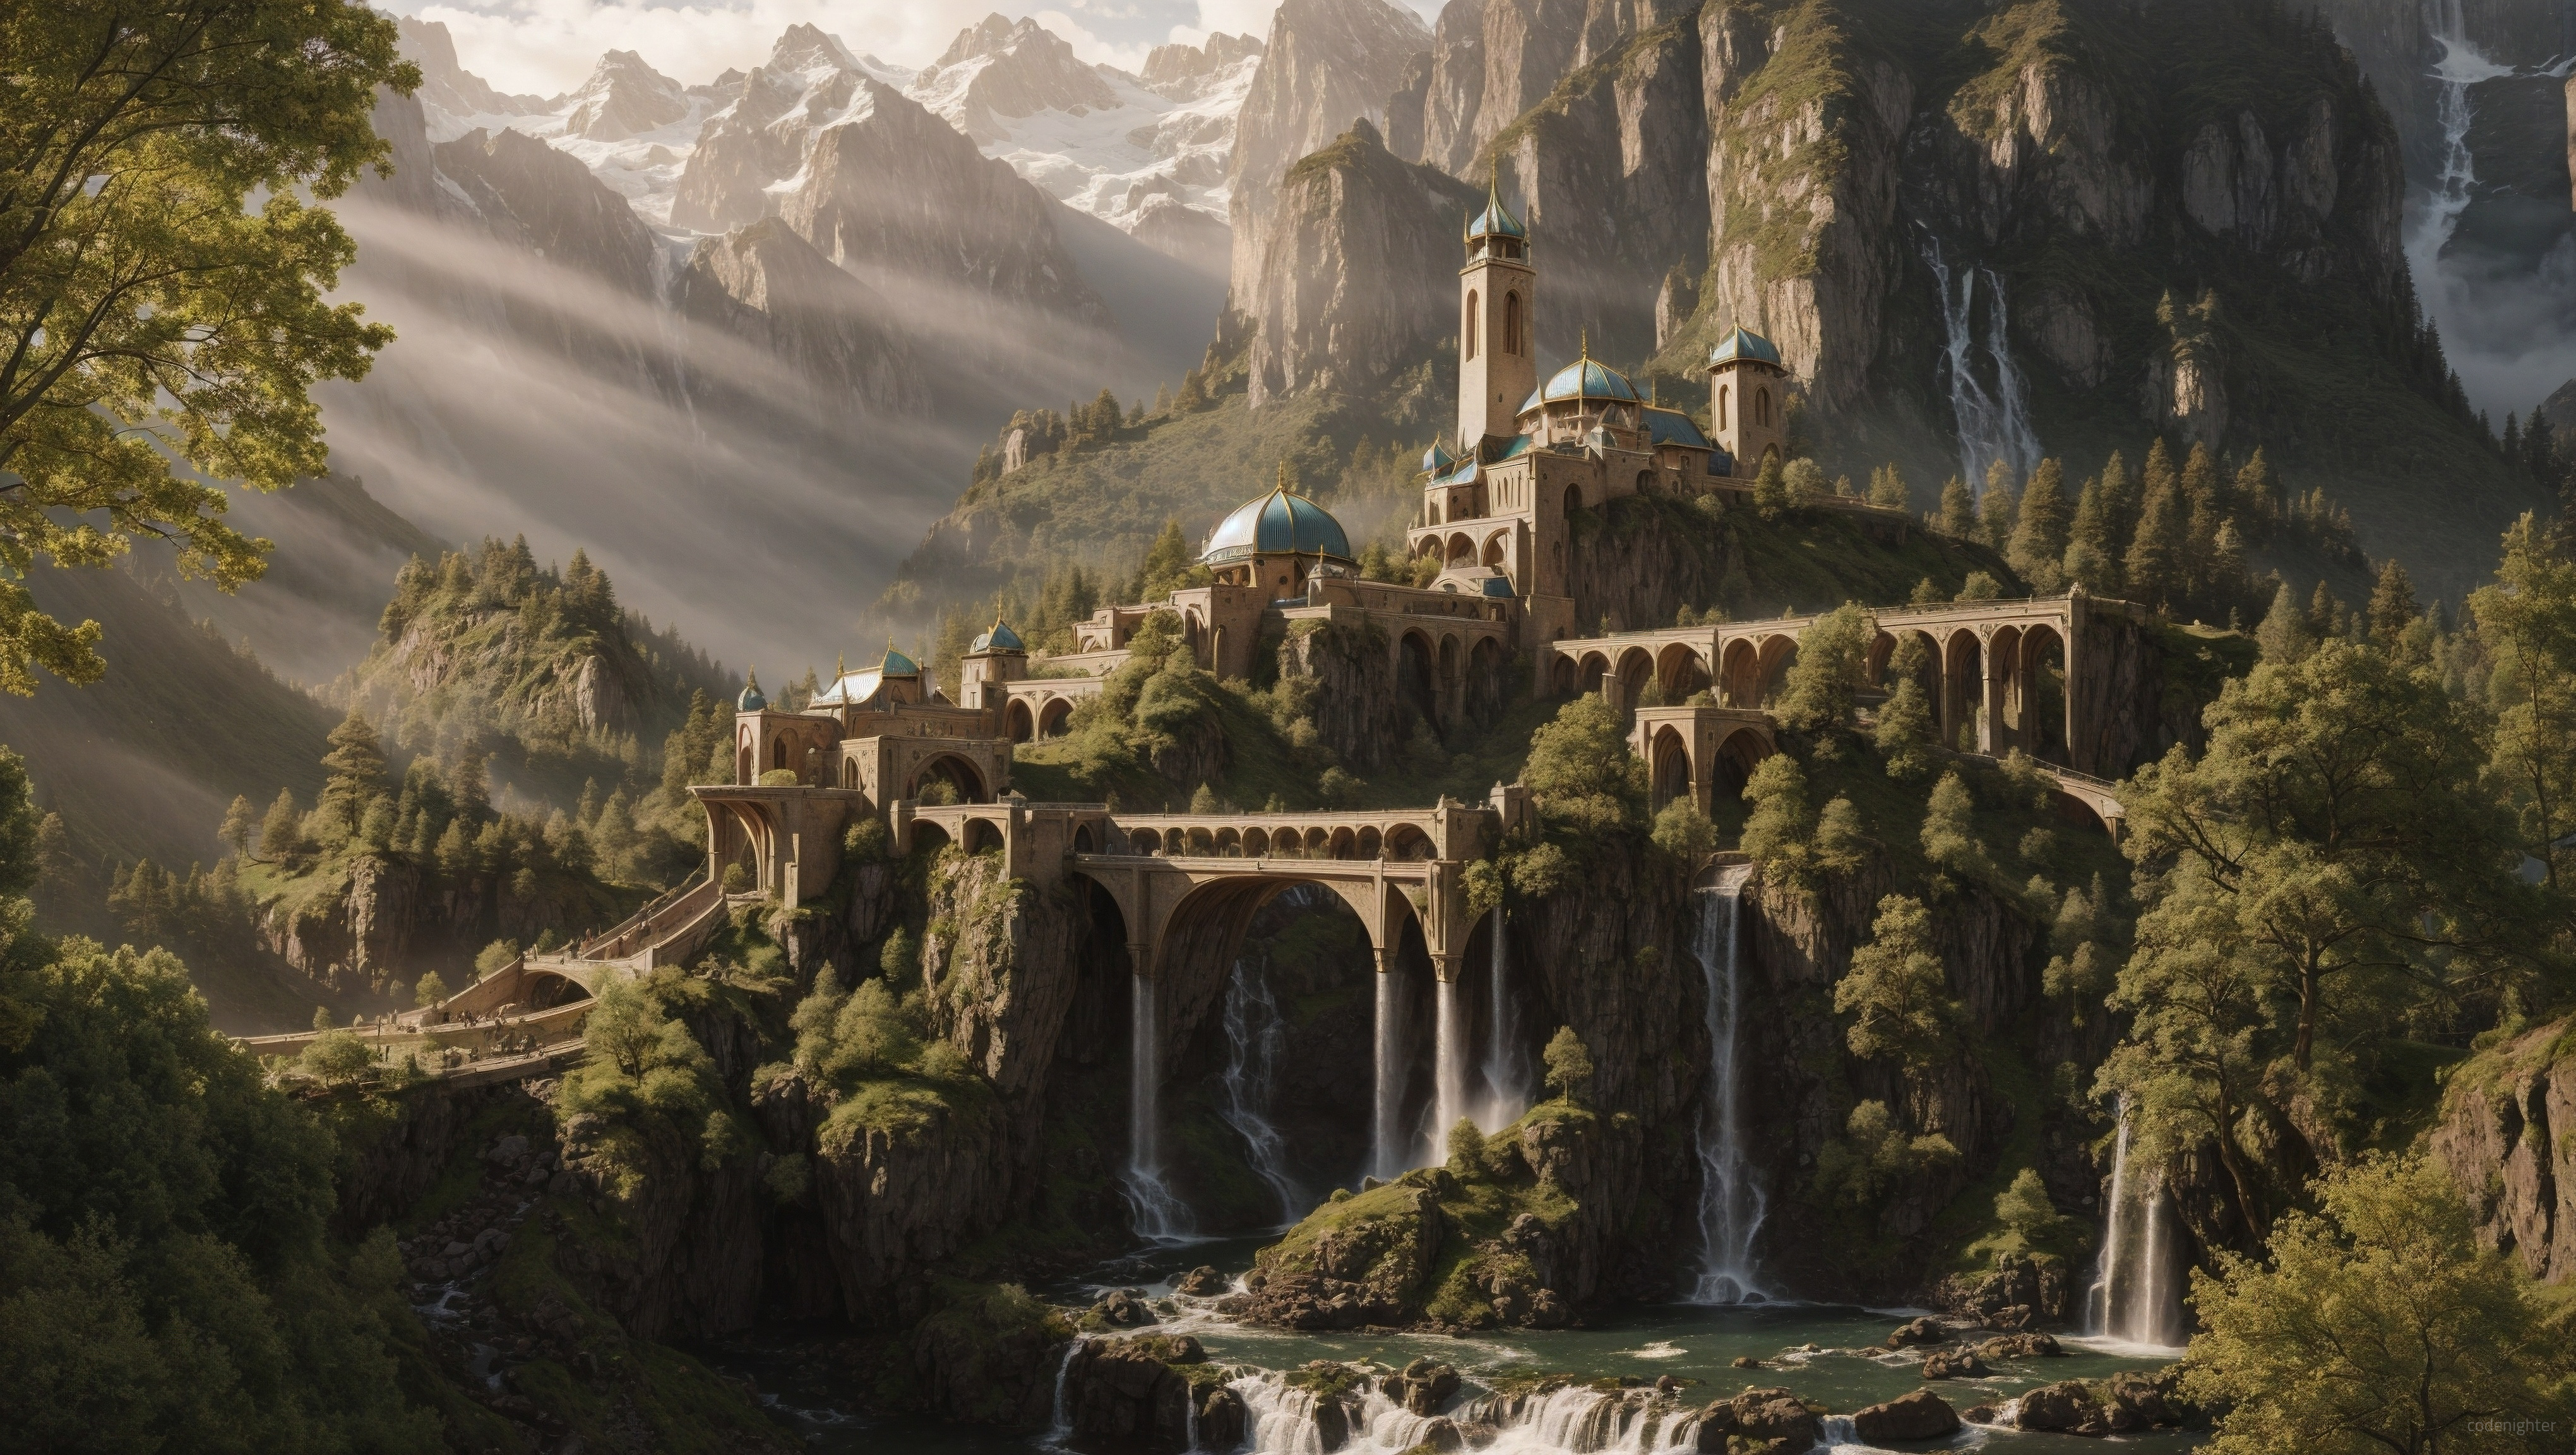 General 4080x2304 AI art digital art landscape J. R. R. Tolkien waterfall mountains natural light trees water sunlight nature architecture outdoors